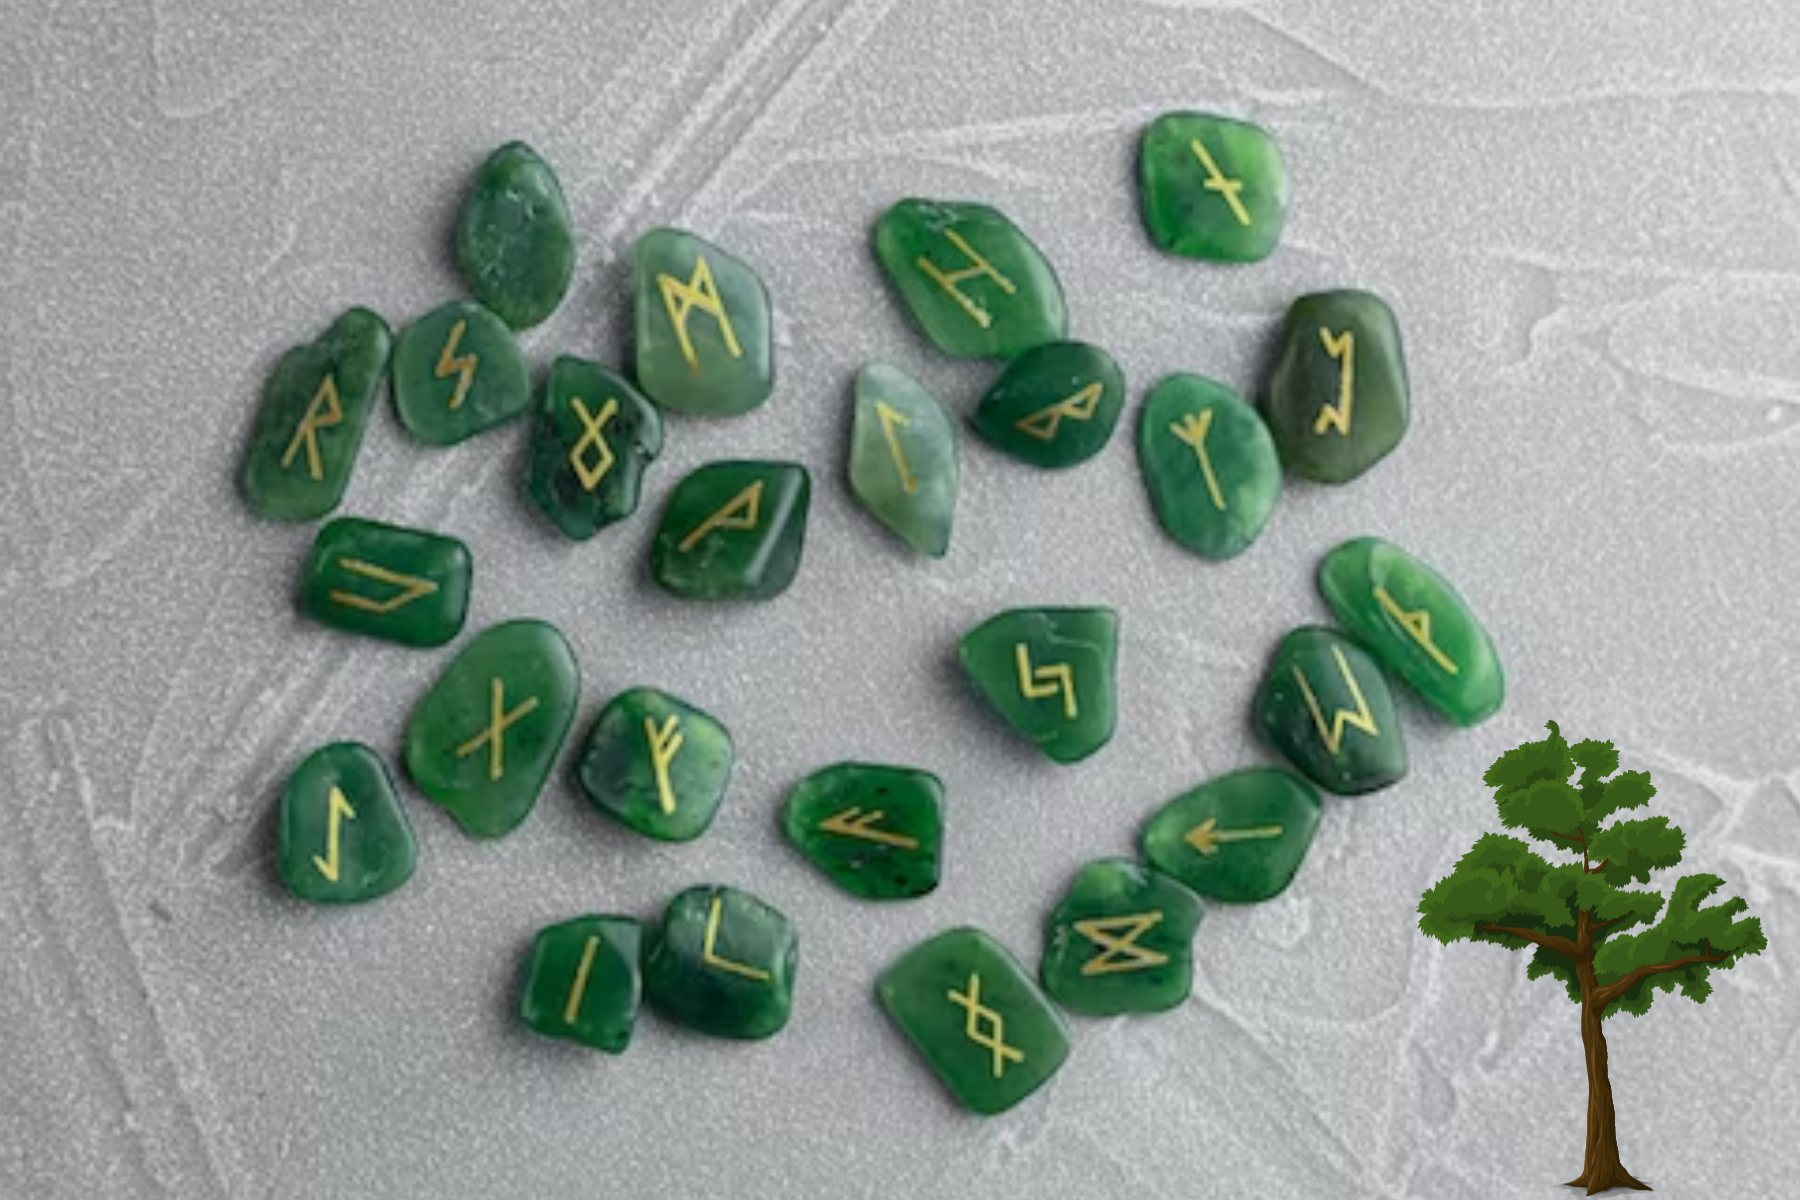 Next to a little tree are twenty-five green gemstones with symbols